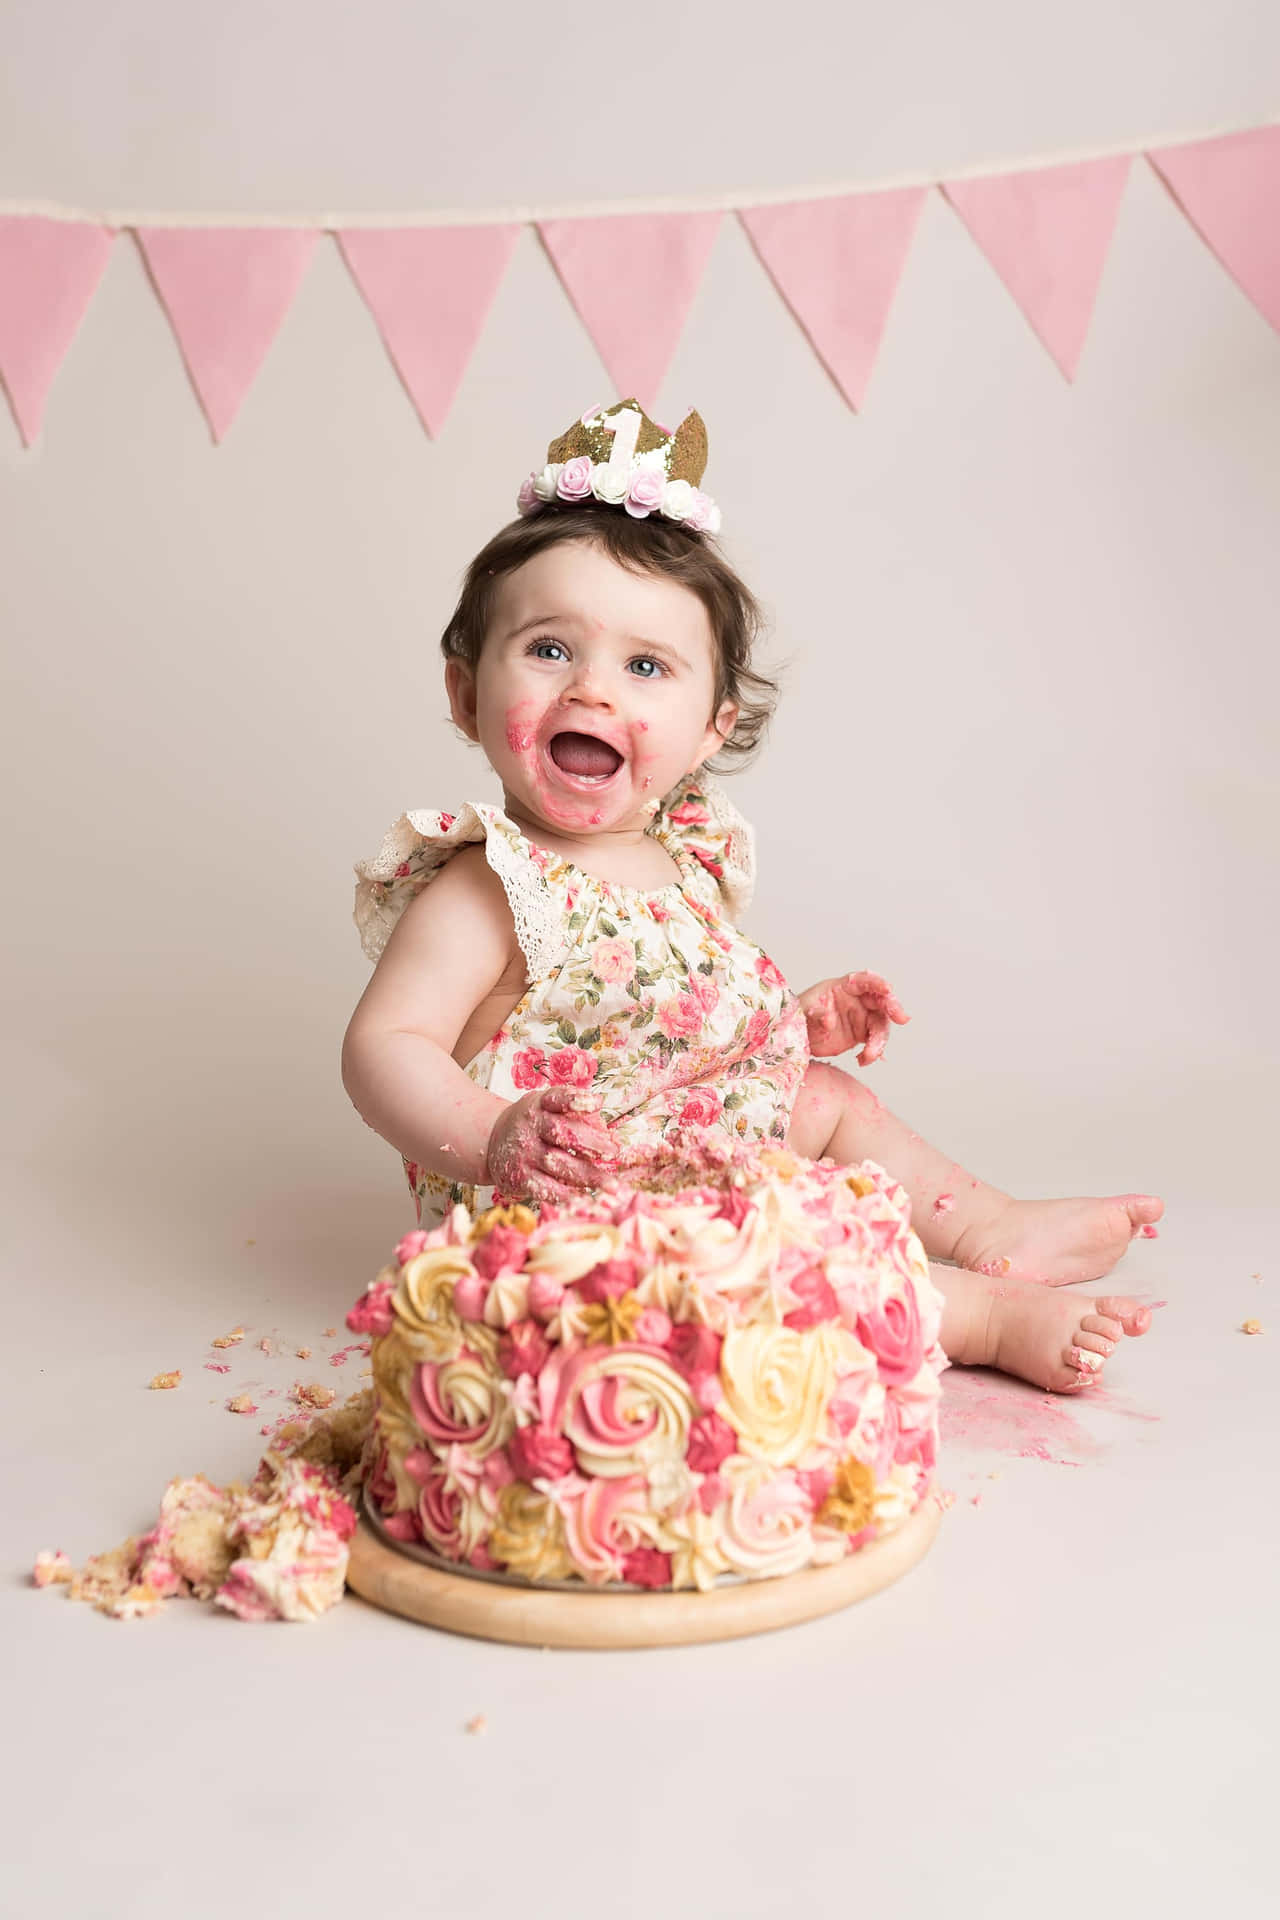 A Baby Girl Is Sitting In Front Of A Cake